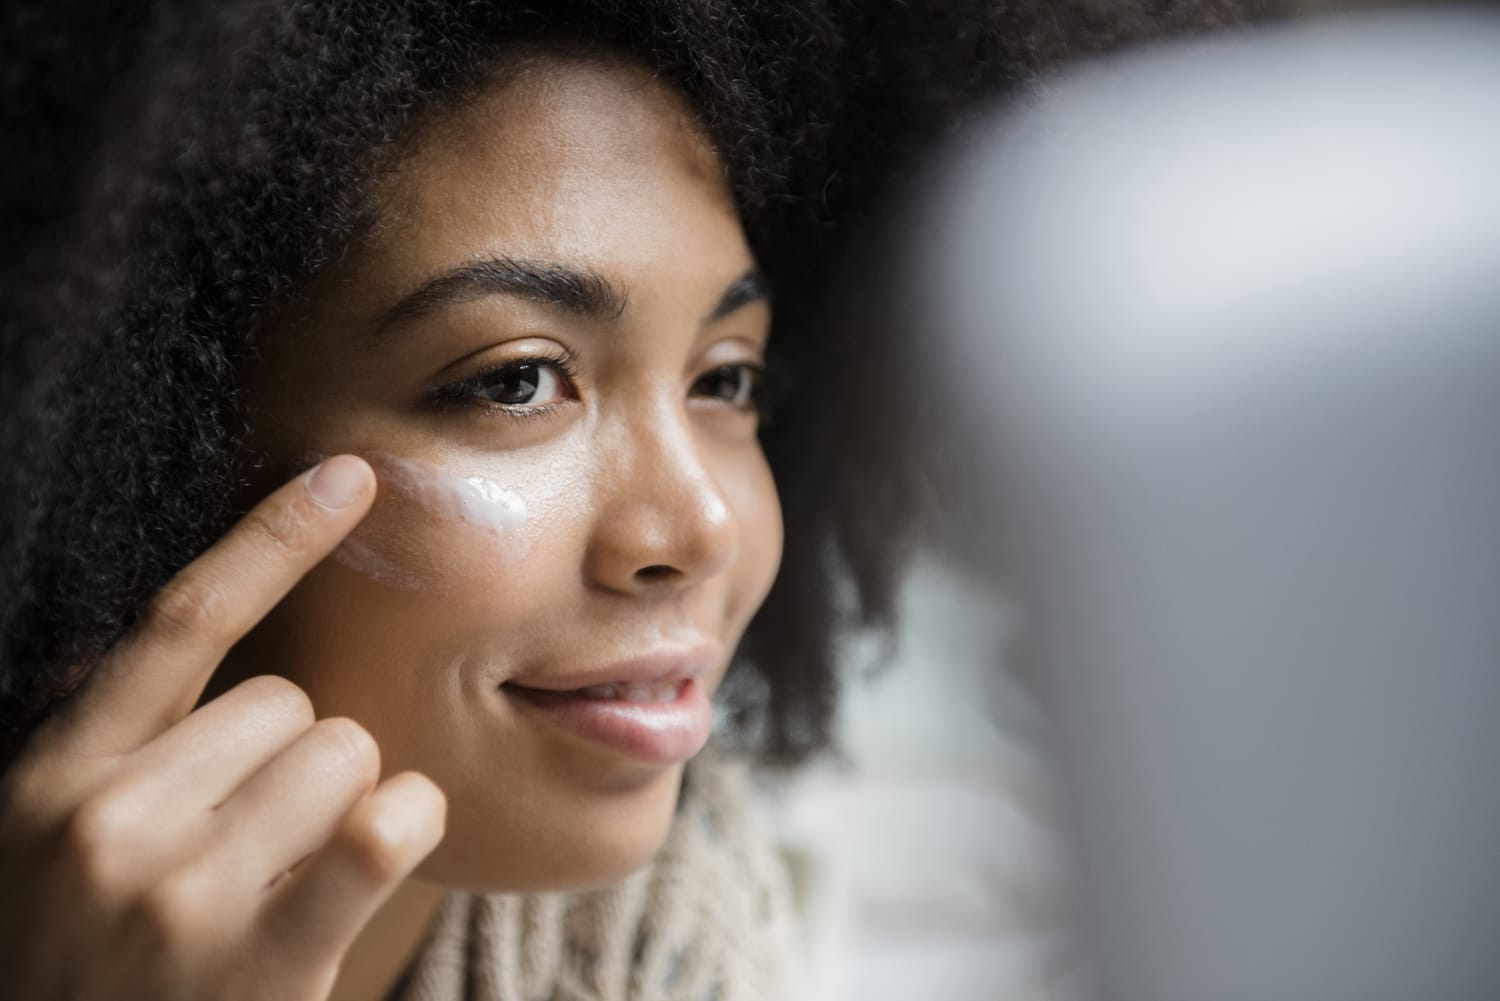 The Top 10 Home Remedies For Acne According To Dermatologists